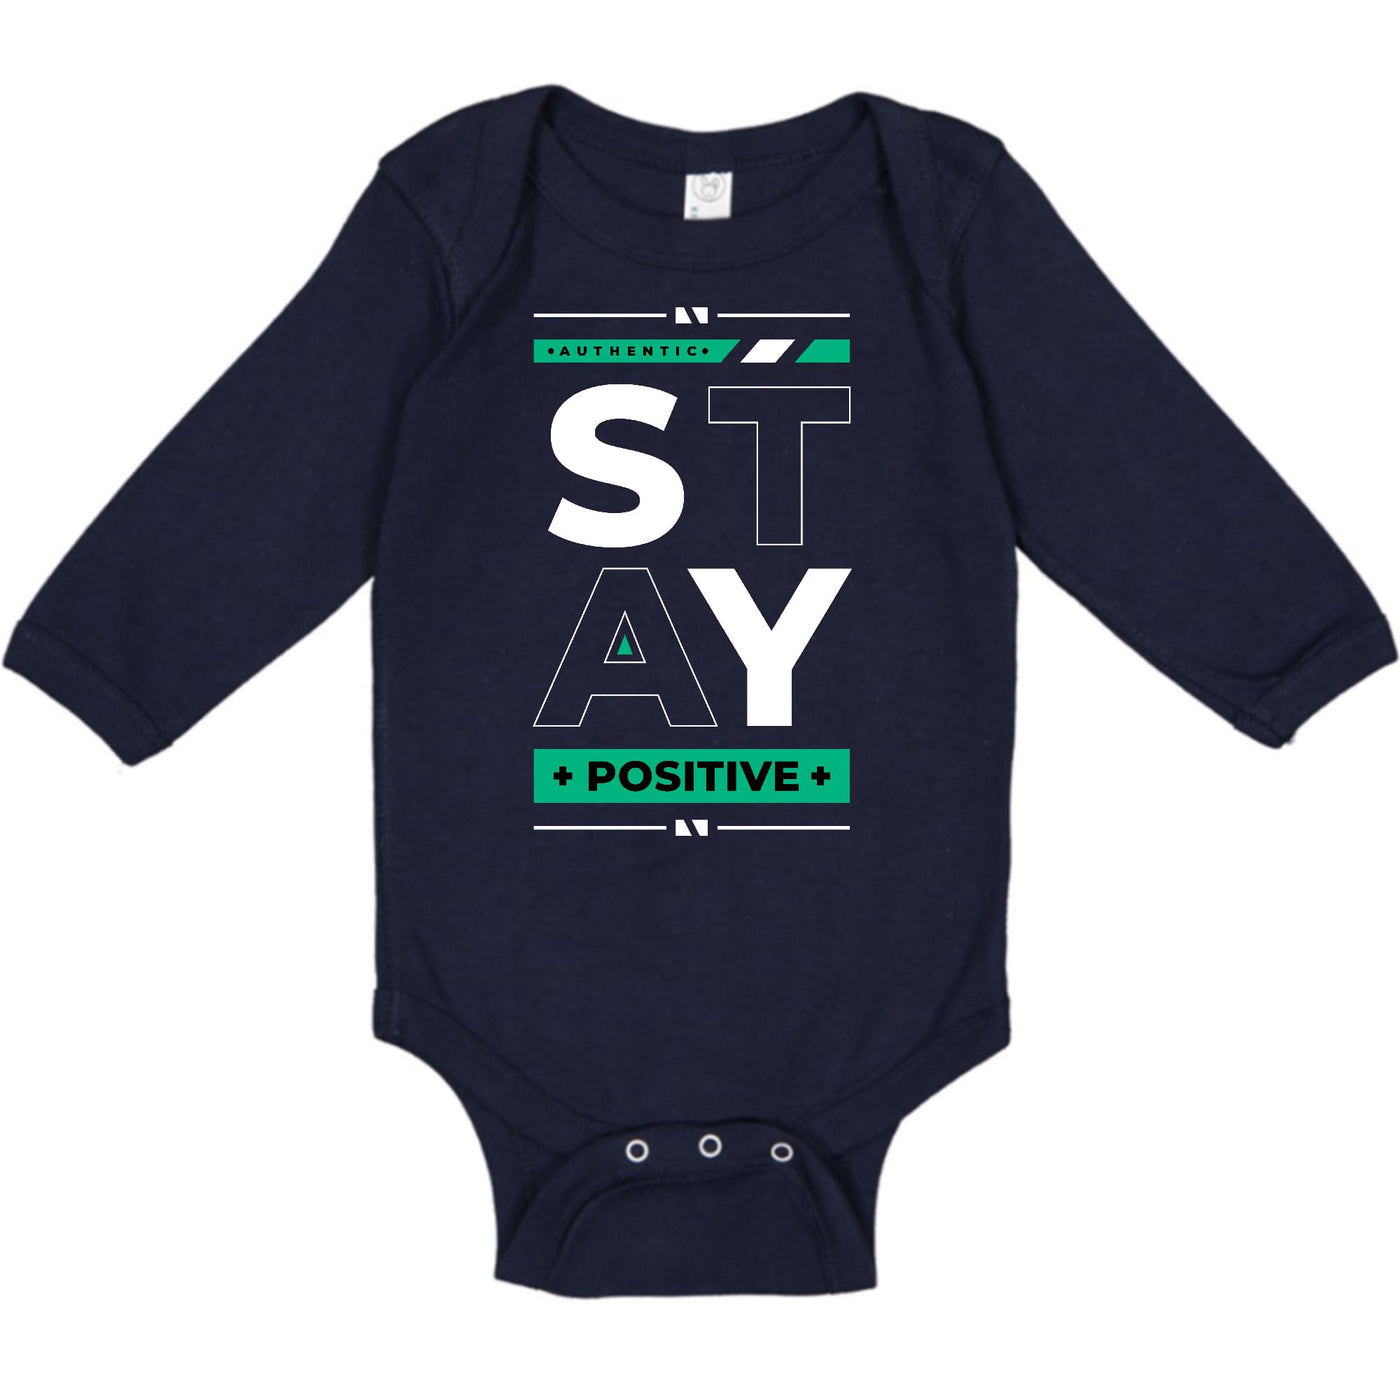 Infant Long Sleeve Graphic T-shirt Stay Positive - Childrens | Infant